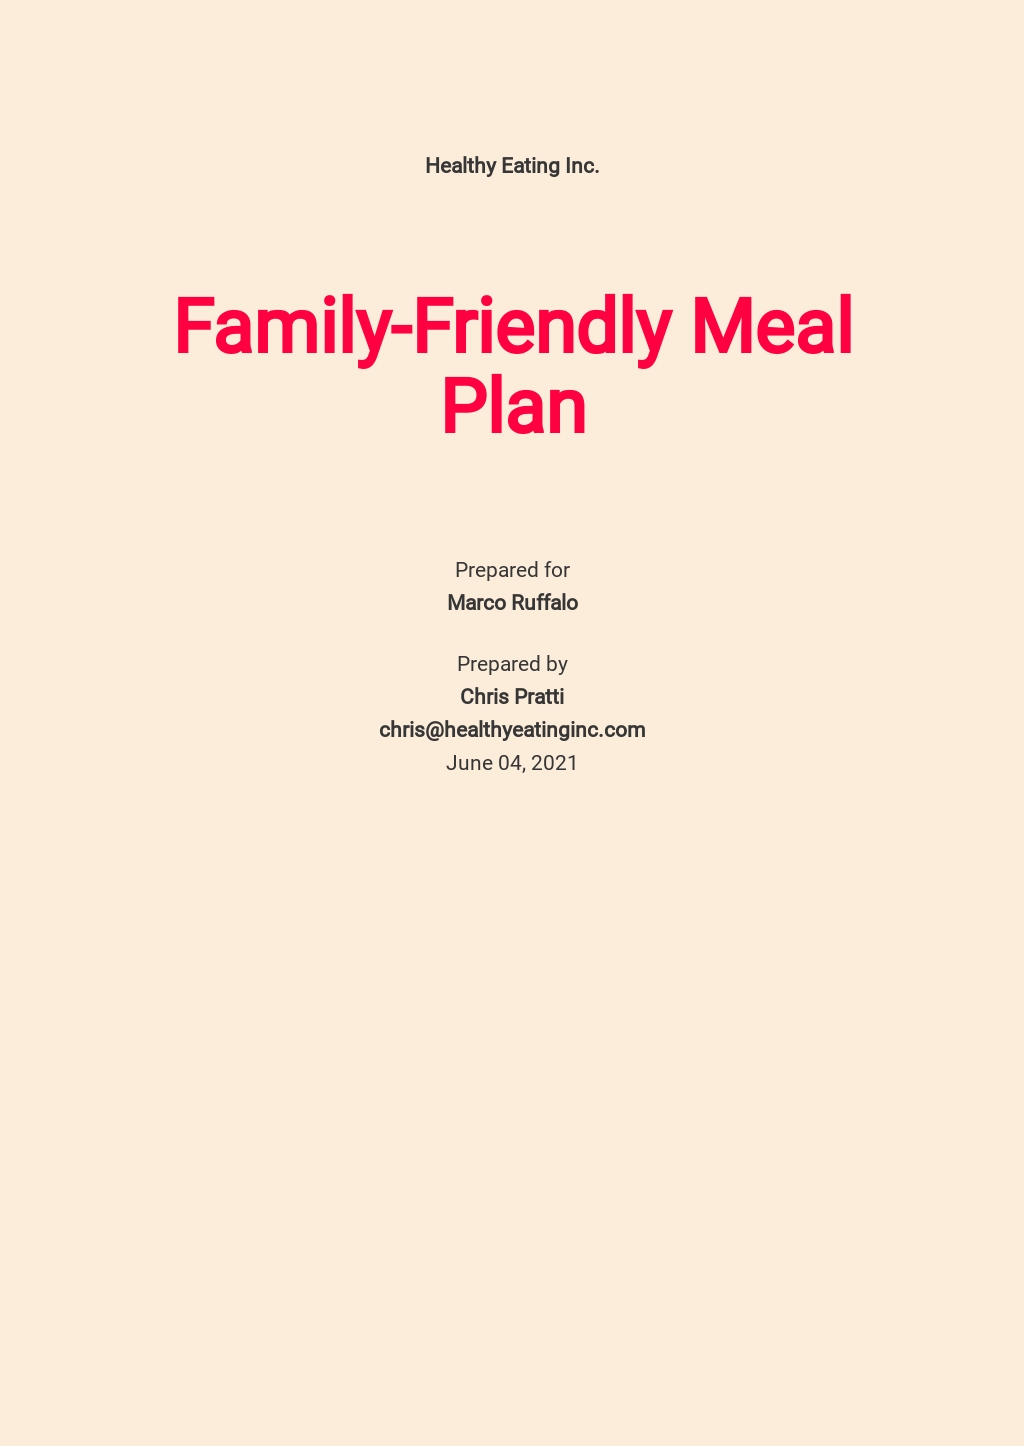 FREE Meal Plan Templates in Google Docs | Template.net